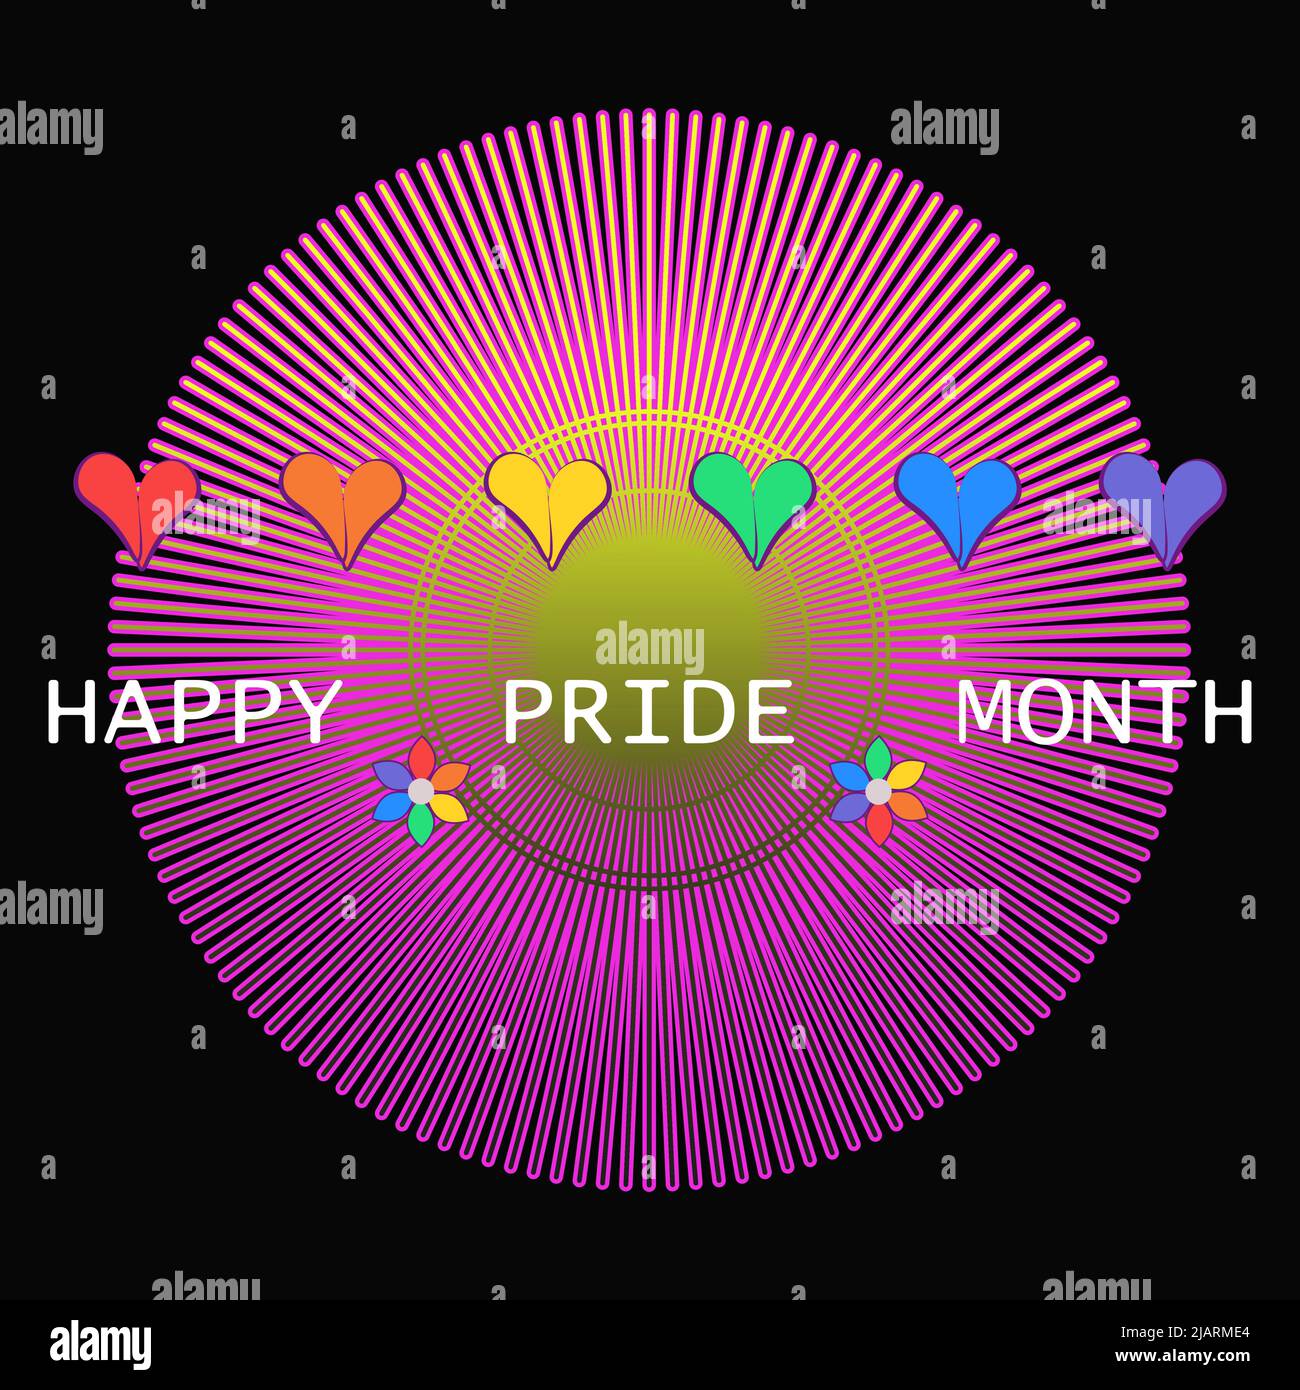 Happy pride month background with text, hearts, flowers in rainbow colors. Vector illustration design happy pride day. Stock Vector